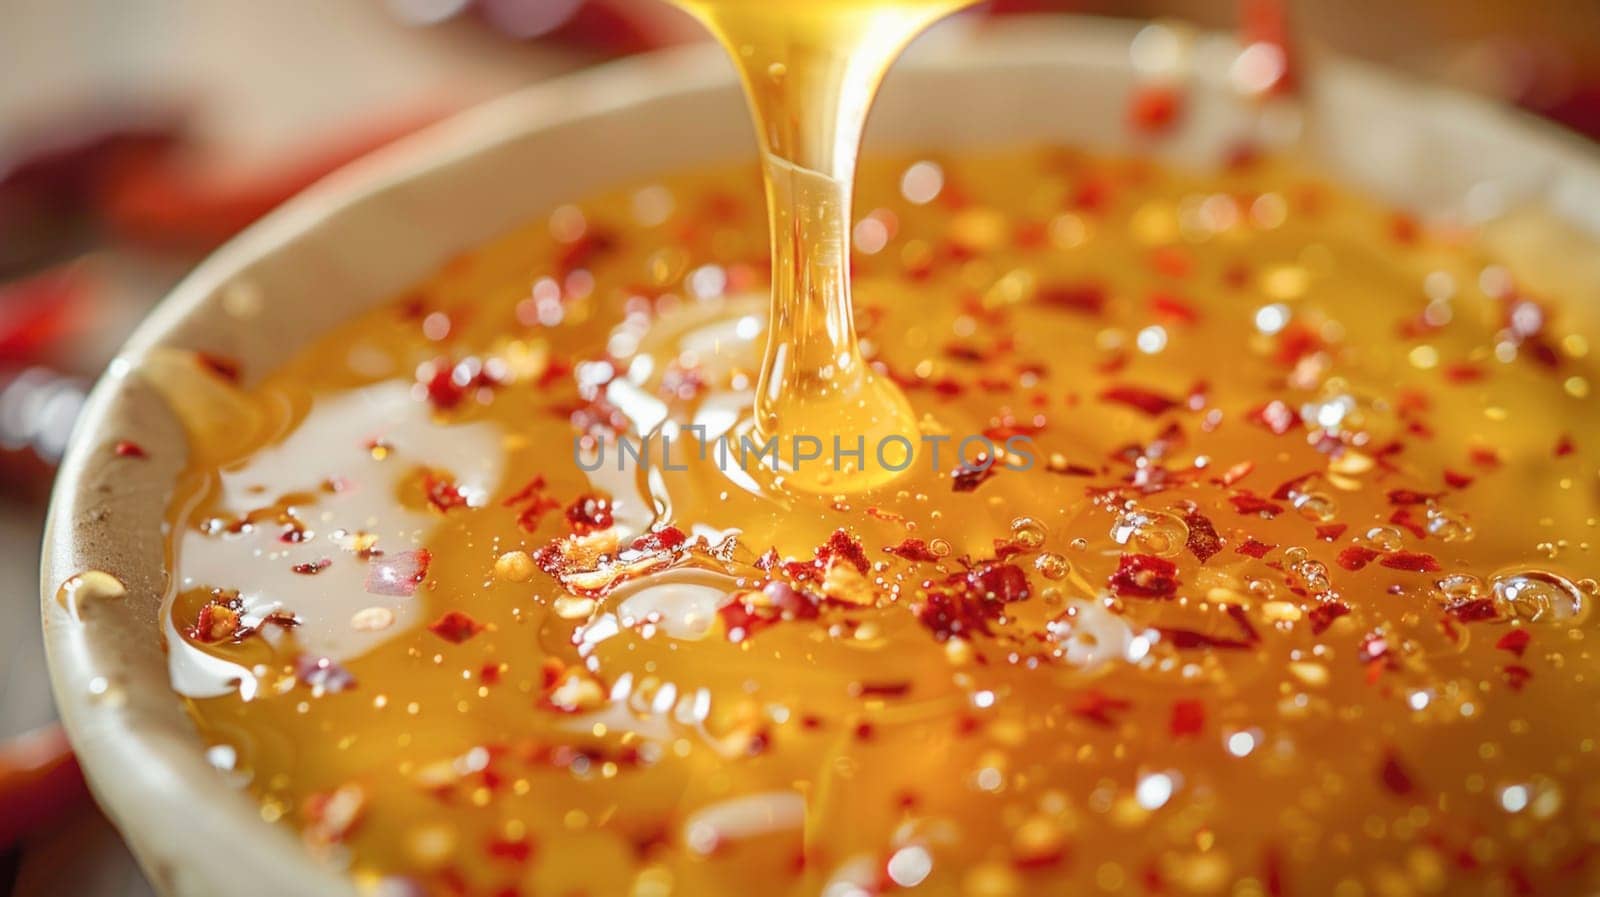 A stream of honey delicately merges with chili sauce in a dish on a table, enhancing the taste profile